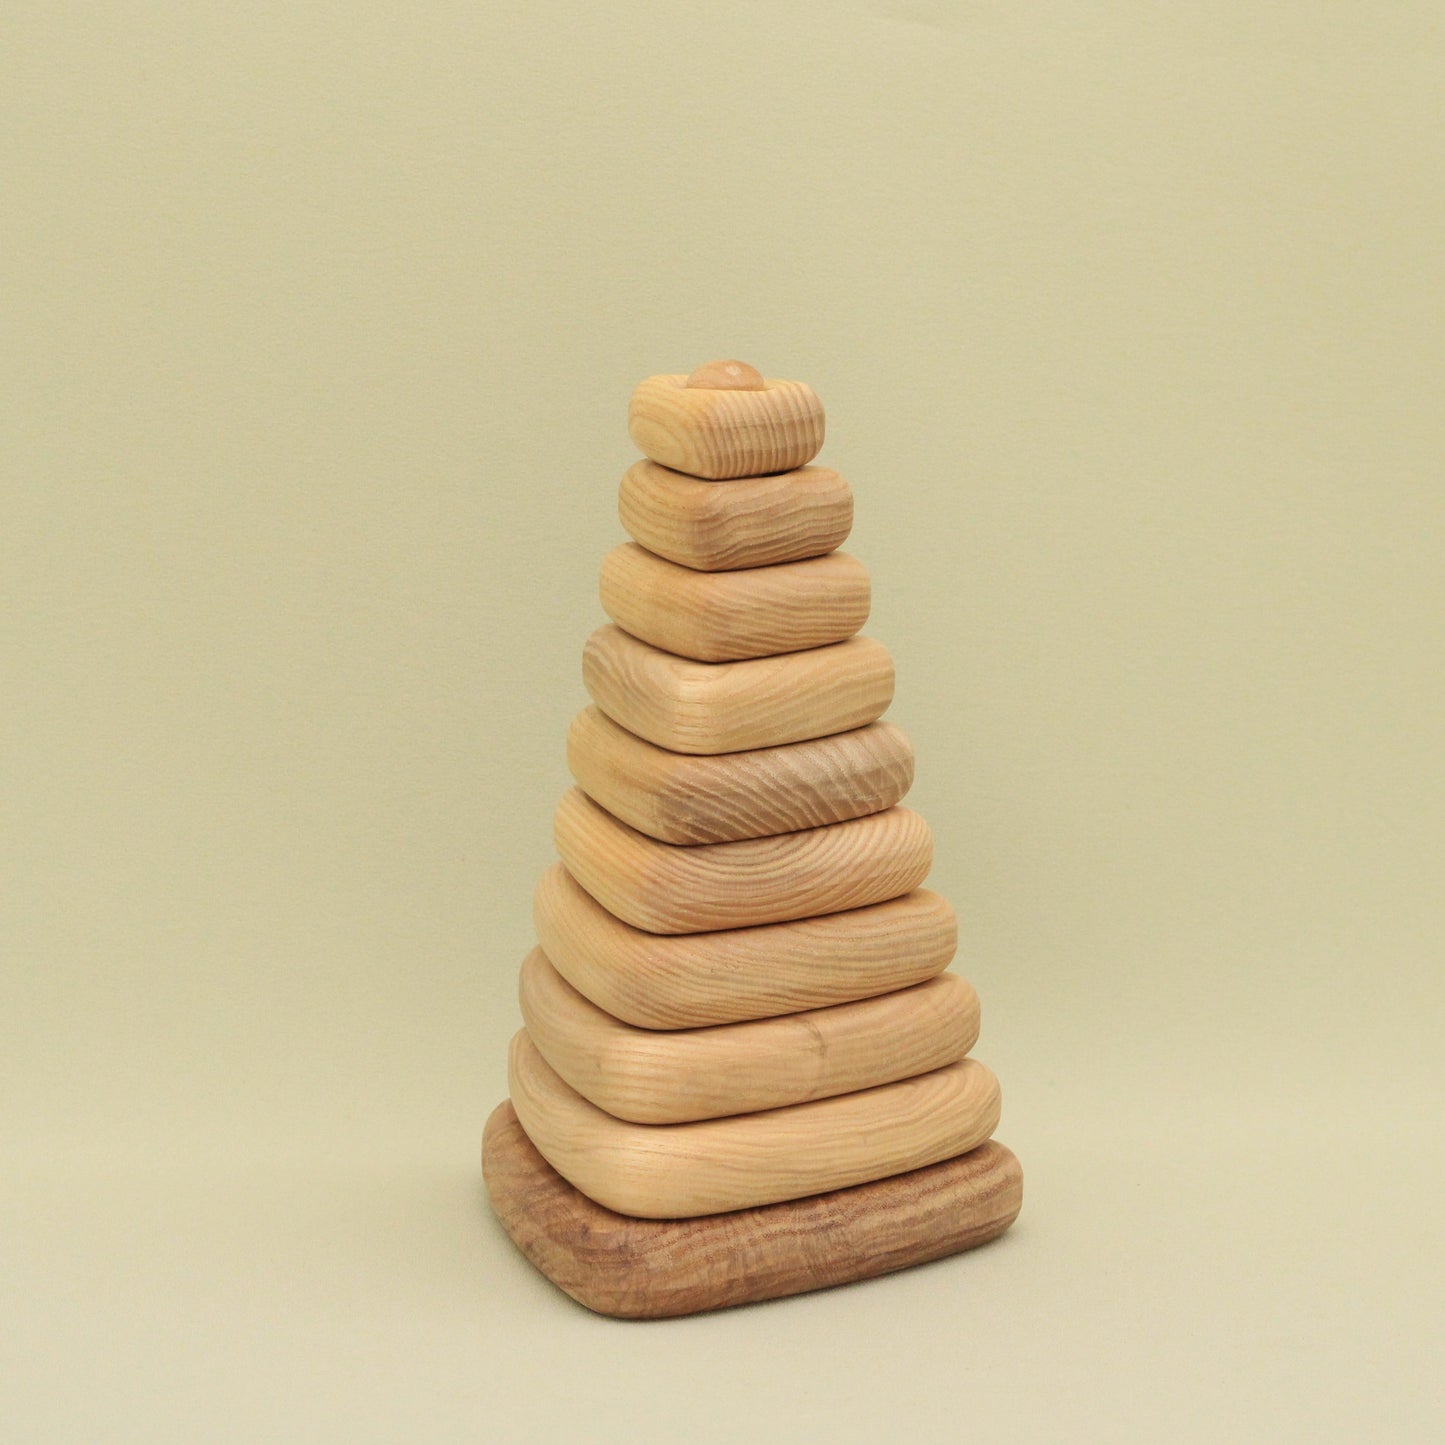 Lotes Toys Natural Triangle Wooden Stacking Pyramid - 10 pieces PY05